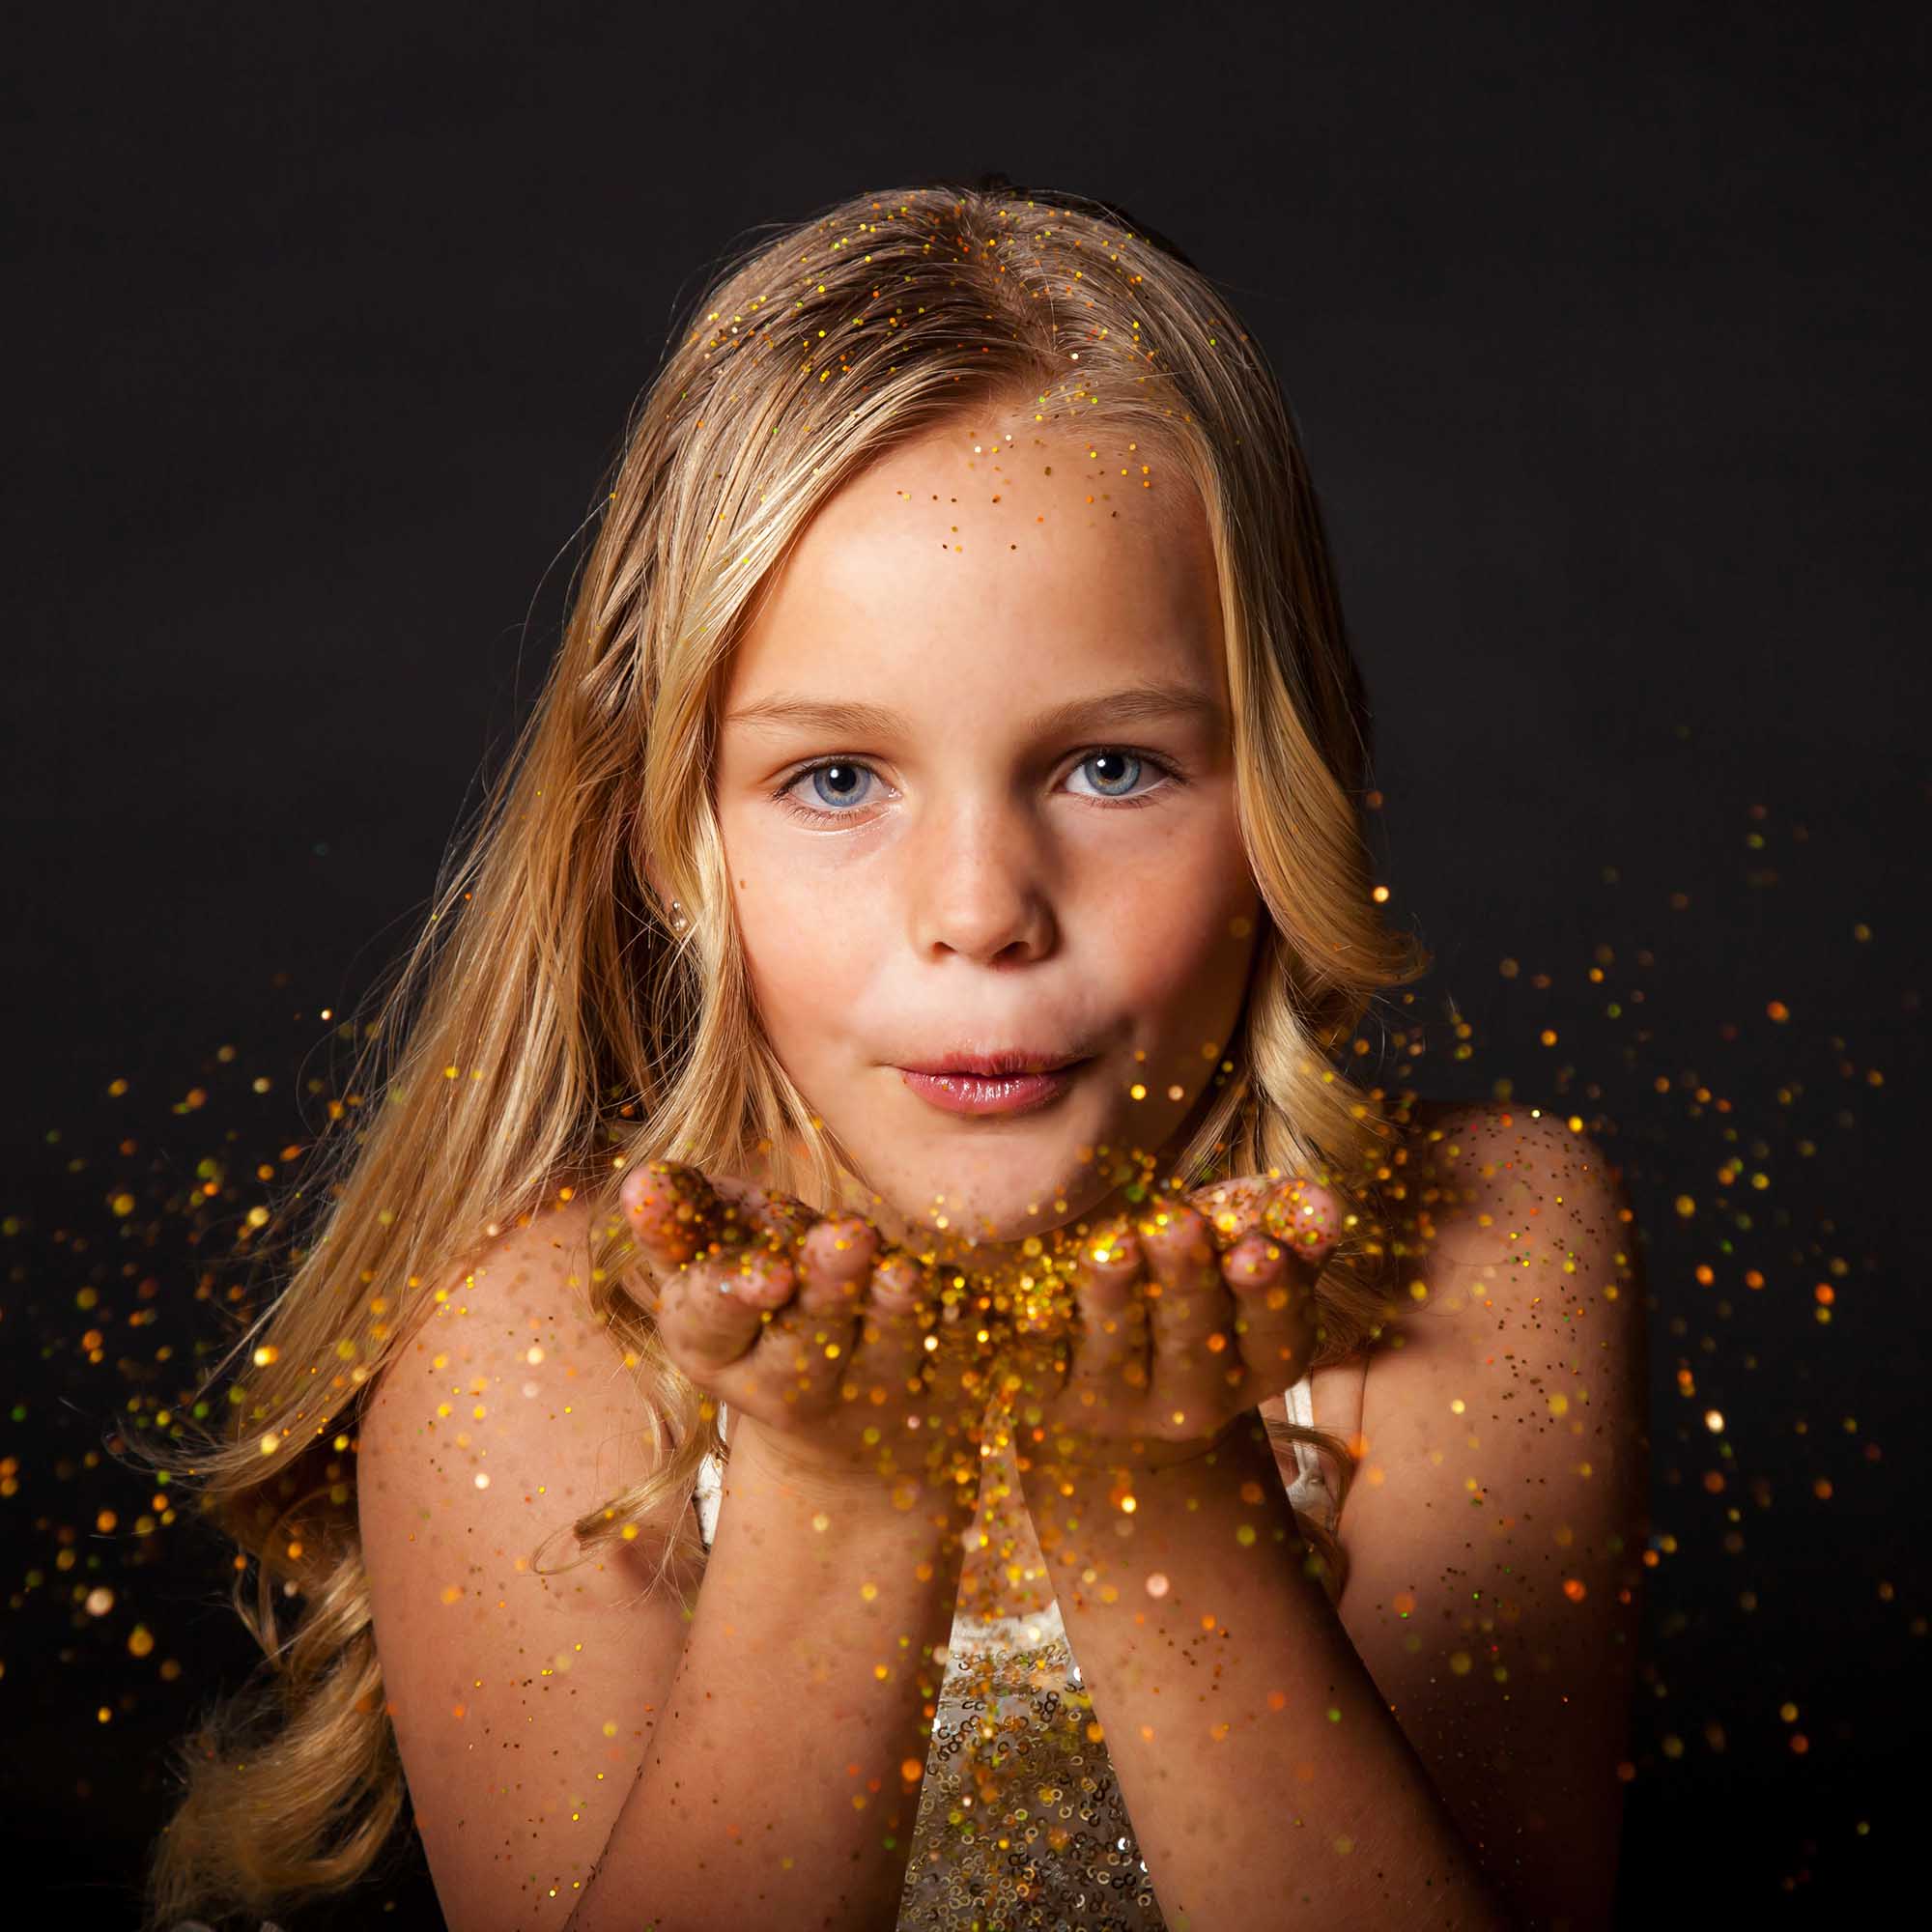 Glitter Session Fine Art Portrait 01 by Eric Pearce Photography